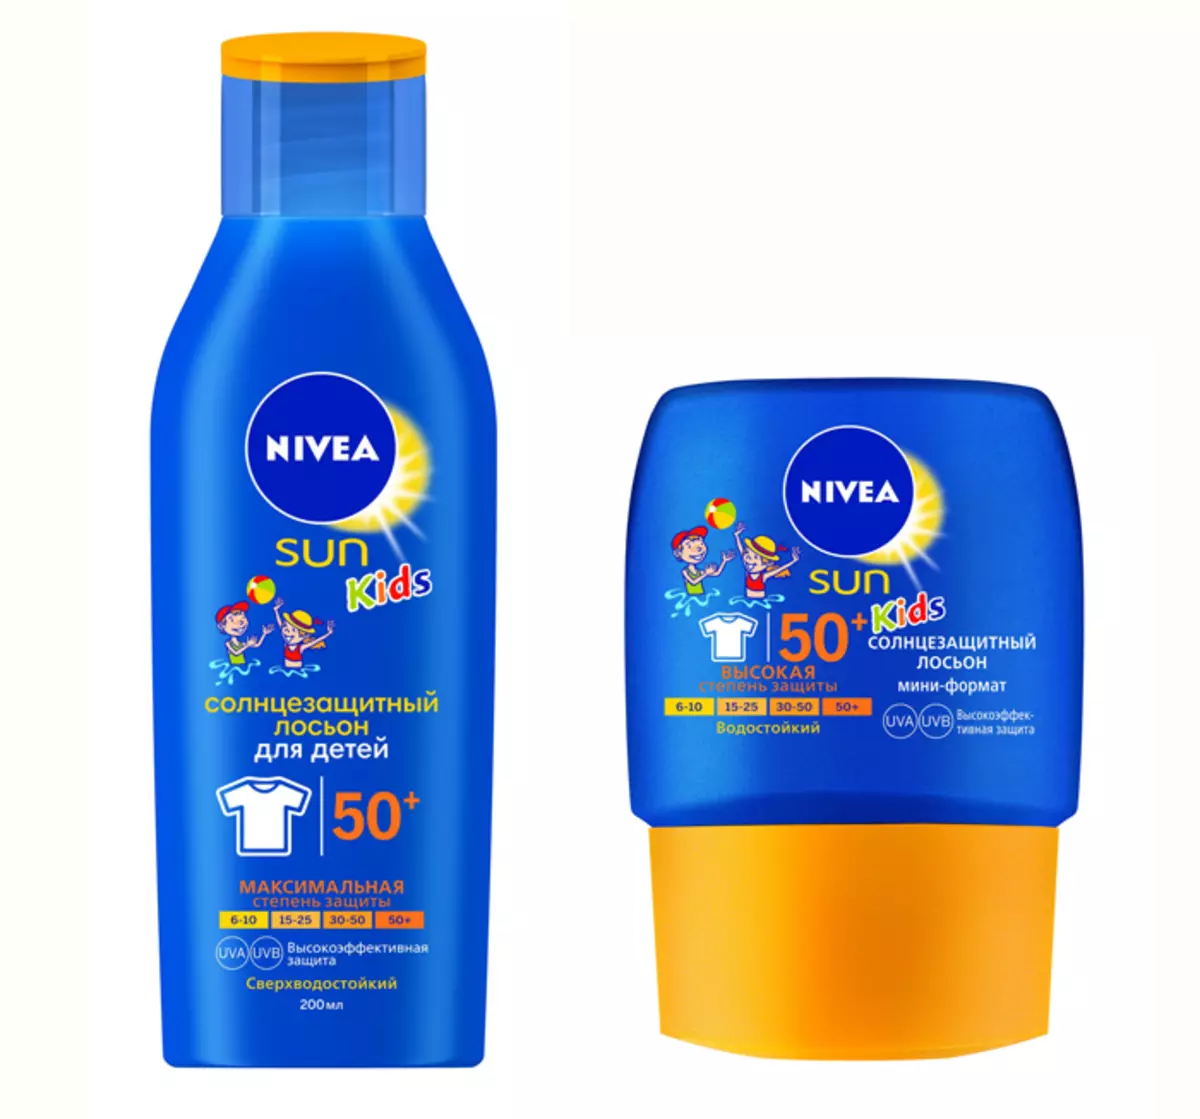 Children's hour: gathered the best beauty products for your heirs 36799_5